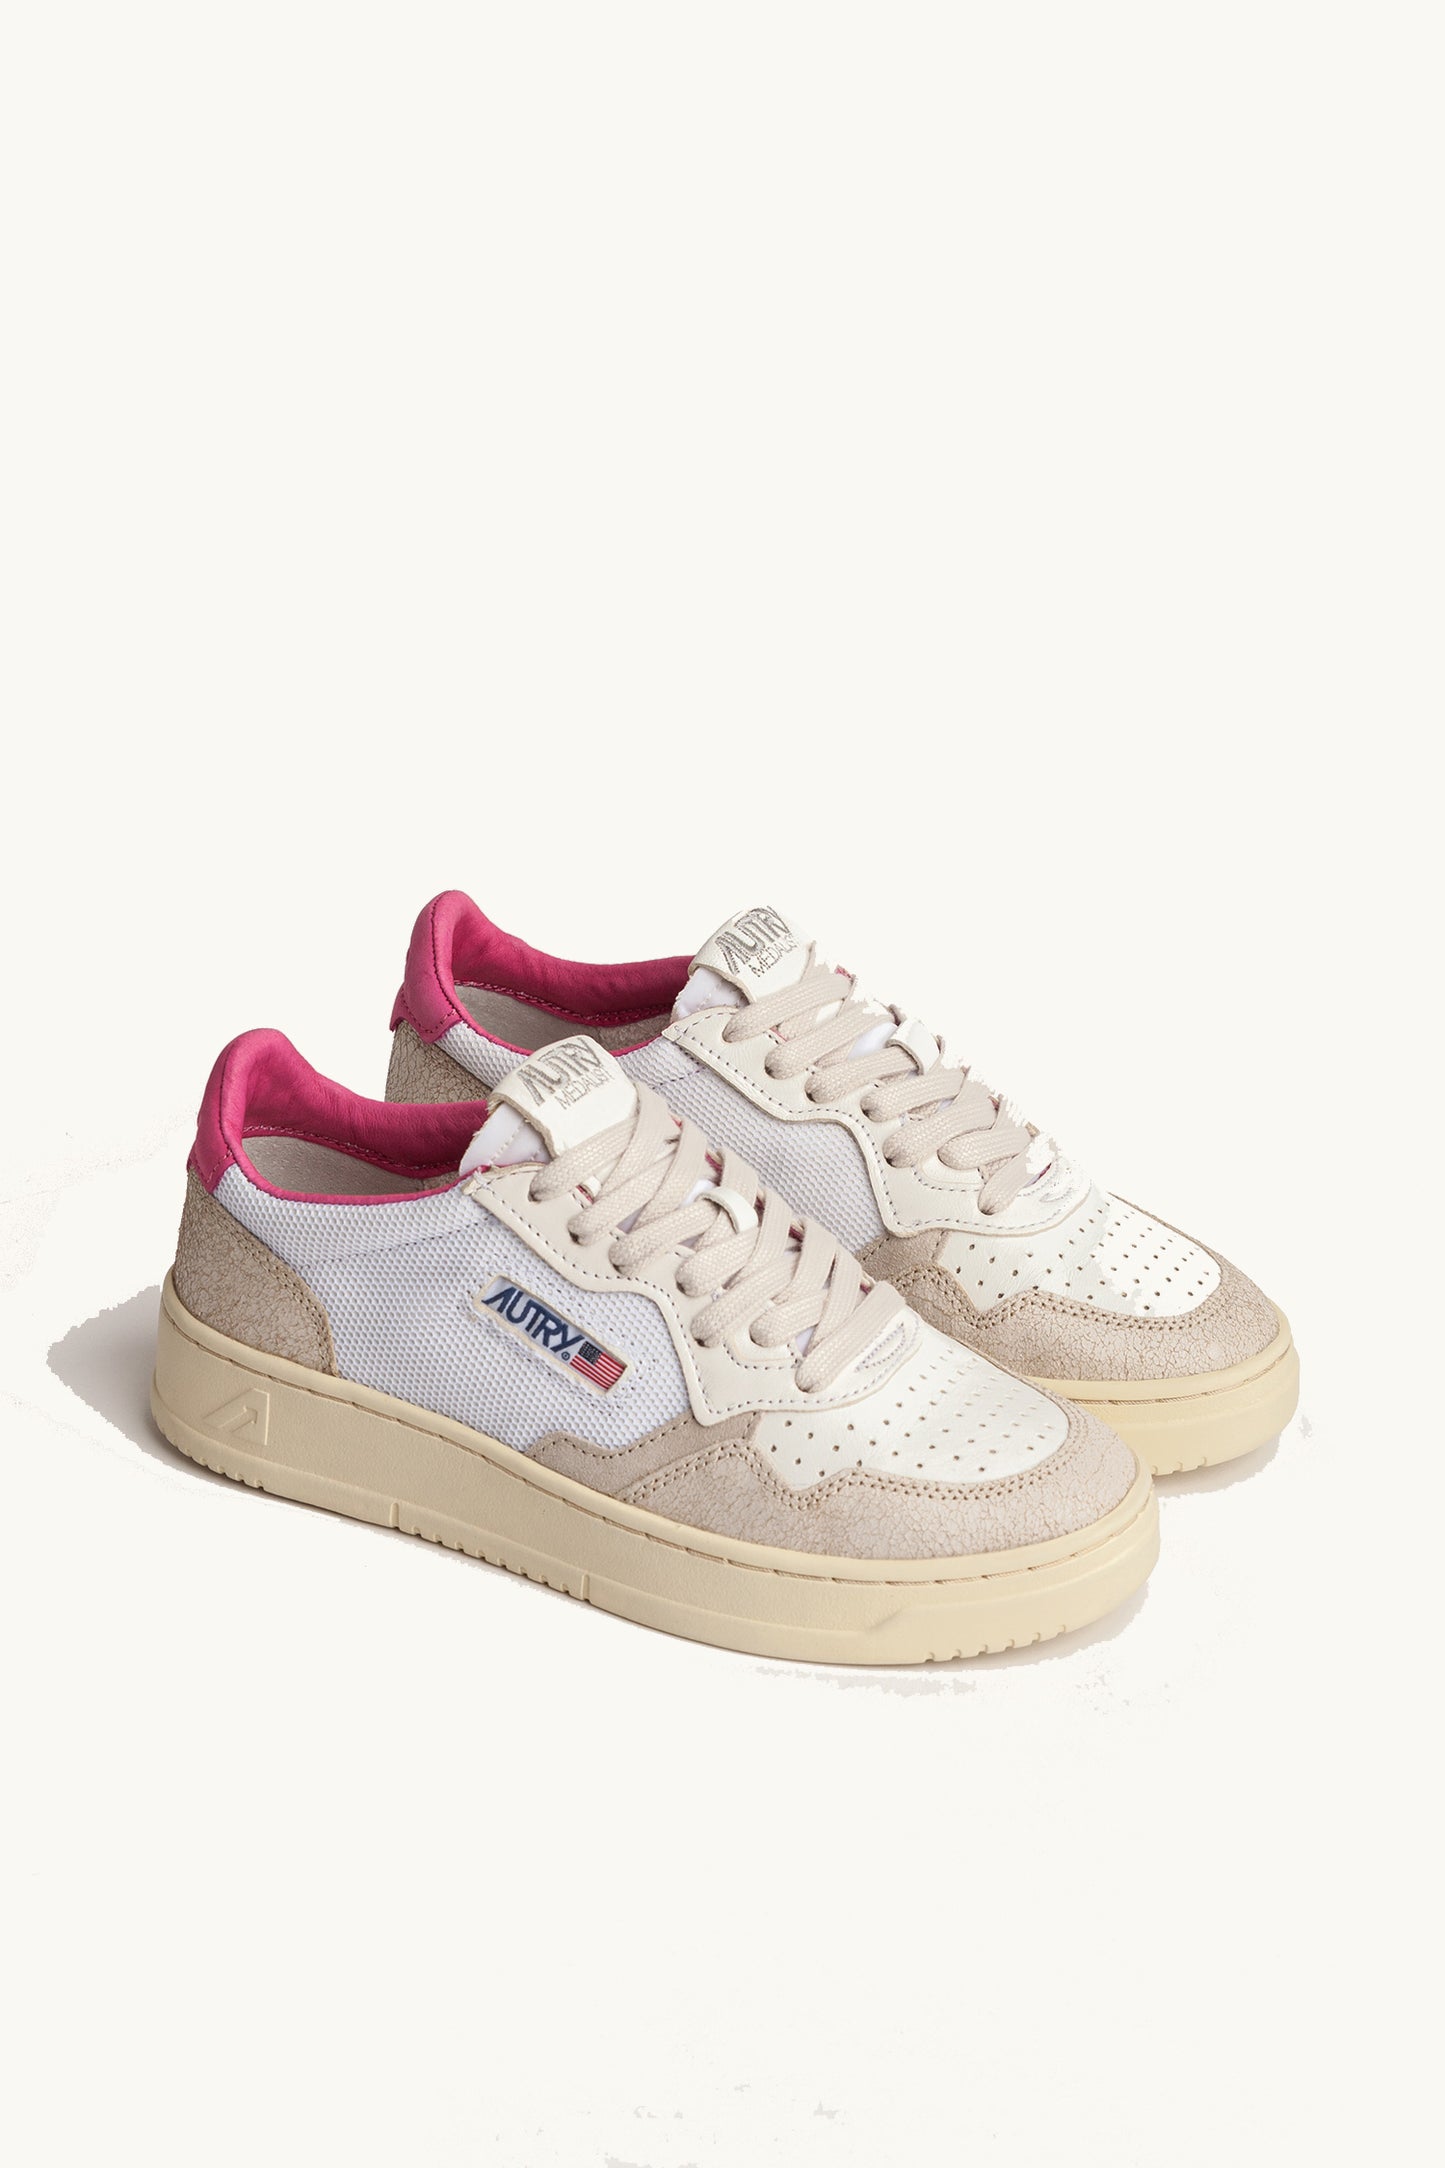 MEDALIST LOW LS64 SUEDE/LEATHER WHITE/MAUVE